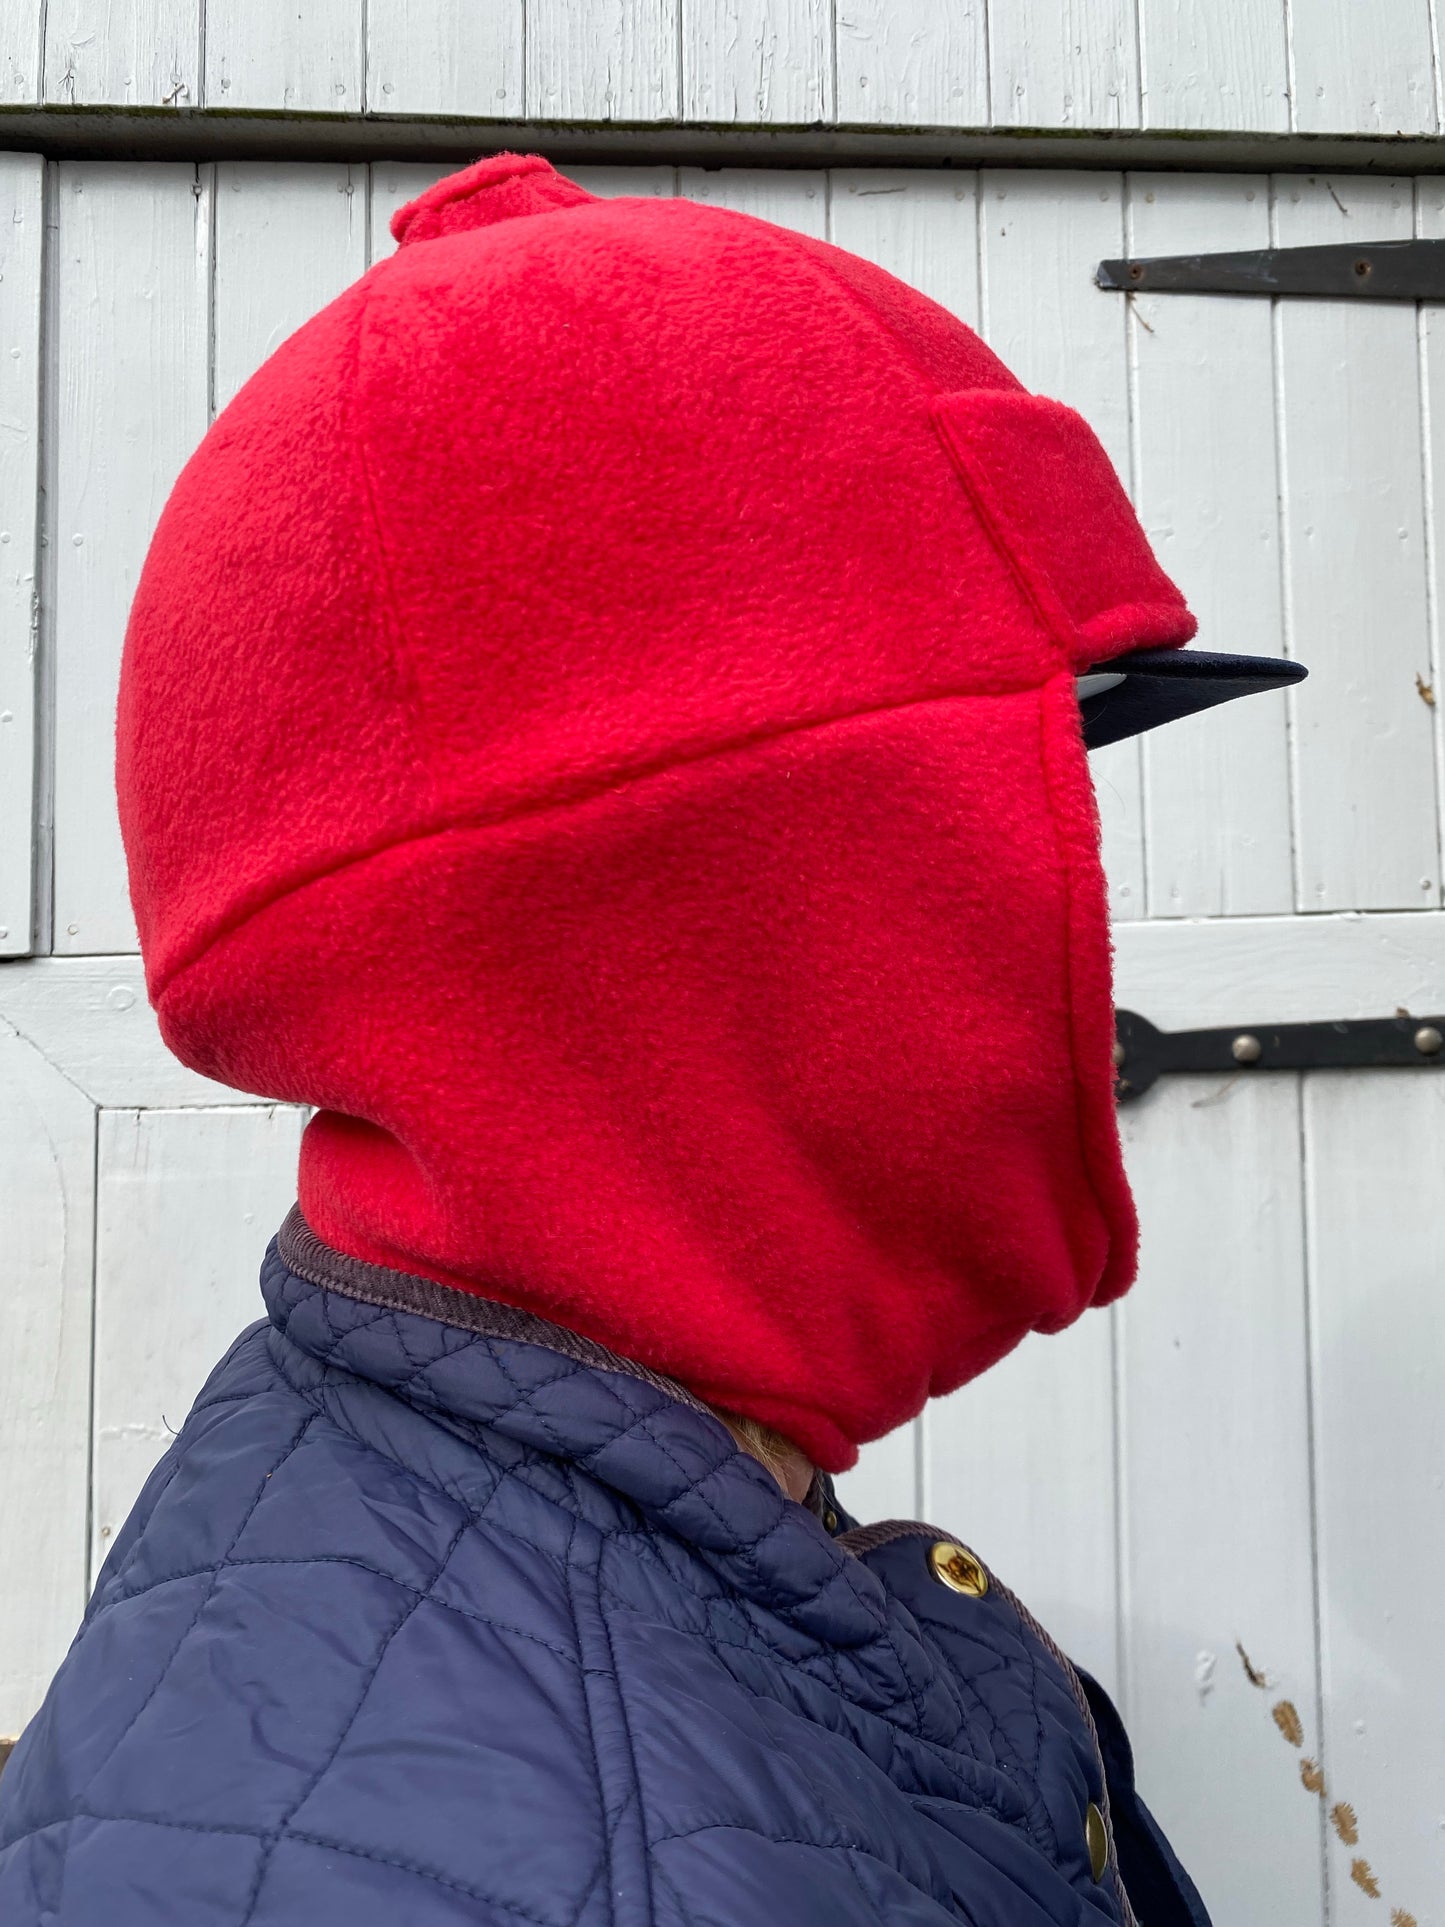 Riding Hat / Face Cover